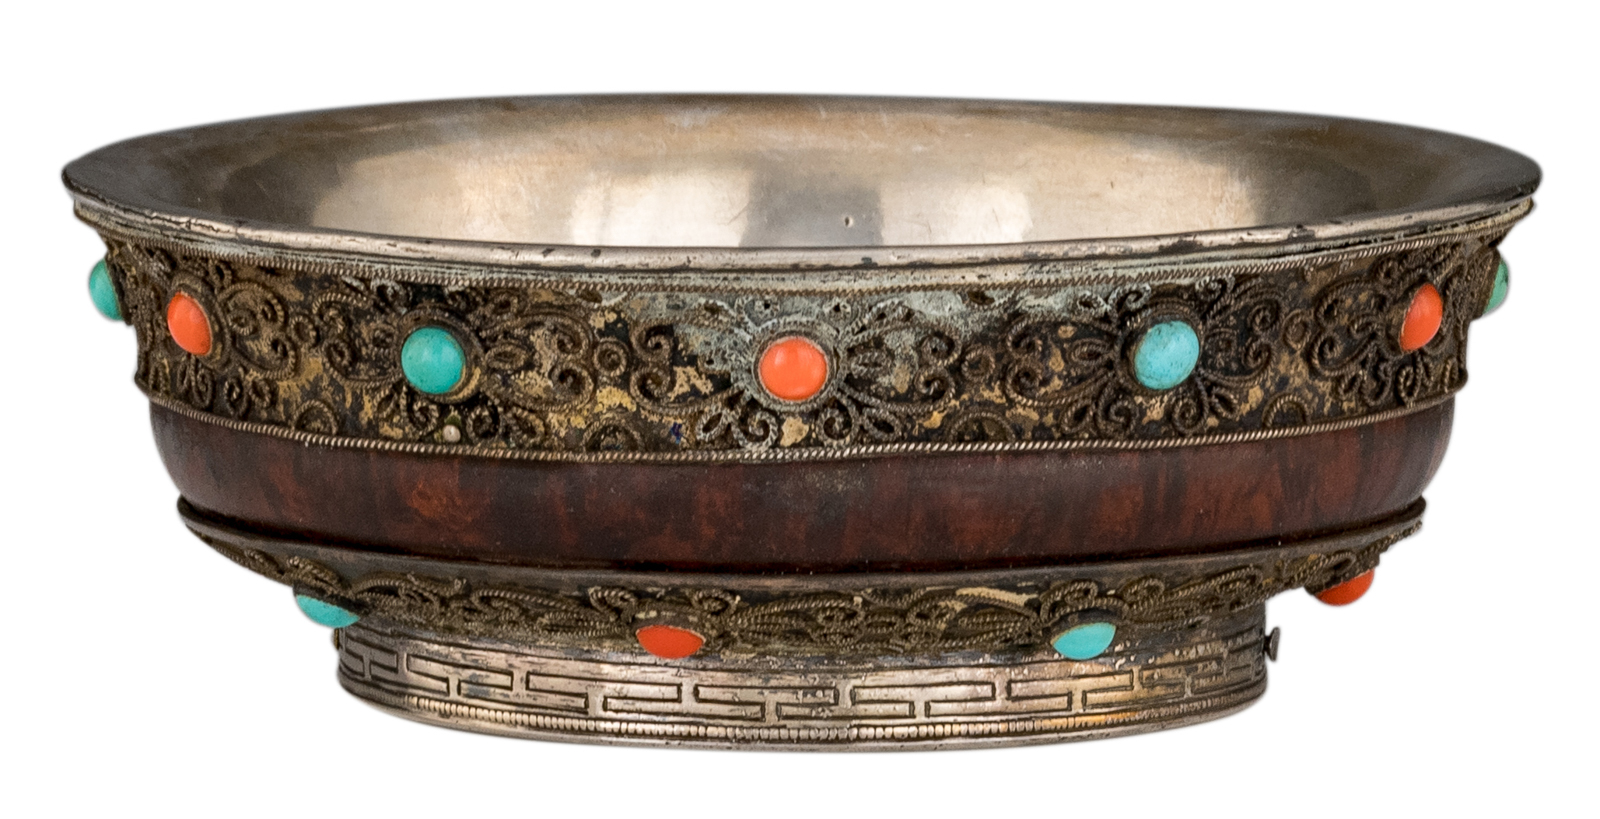 A Sino-Tibetan silver and wooden tsampa bowl, inlaid with coral and turquoise stones, the bottom rim